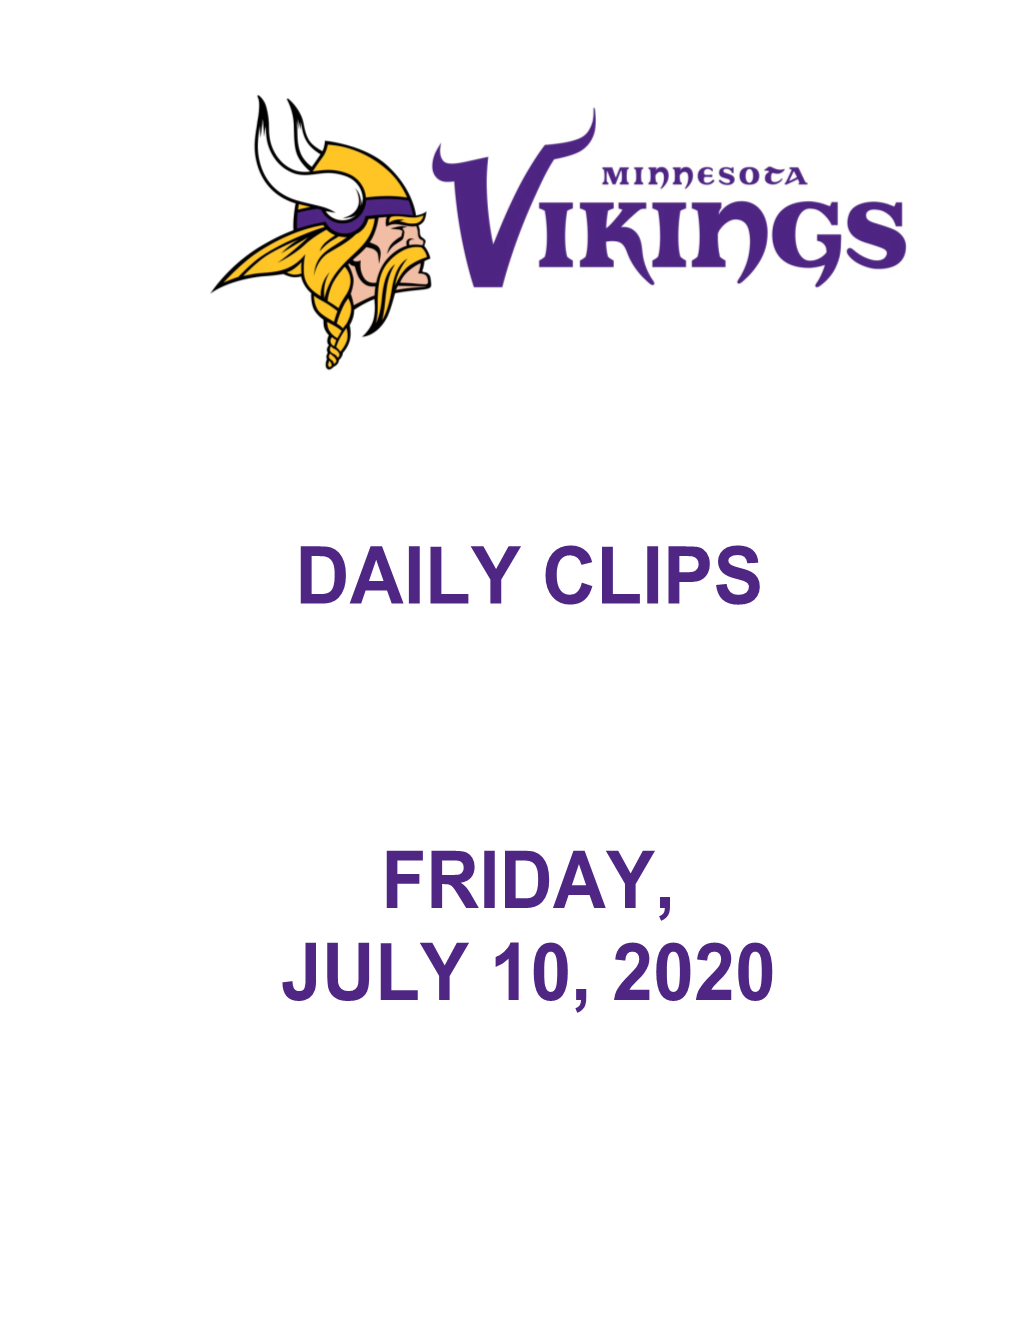 Daily Clips Friday, July 10, 2020